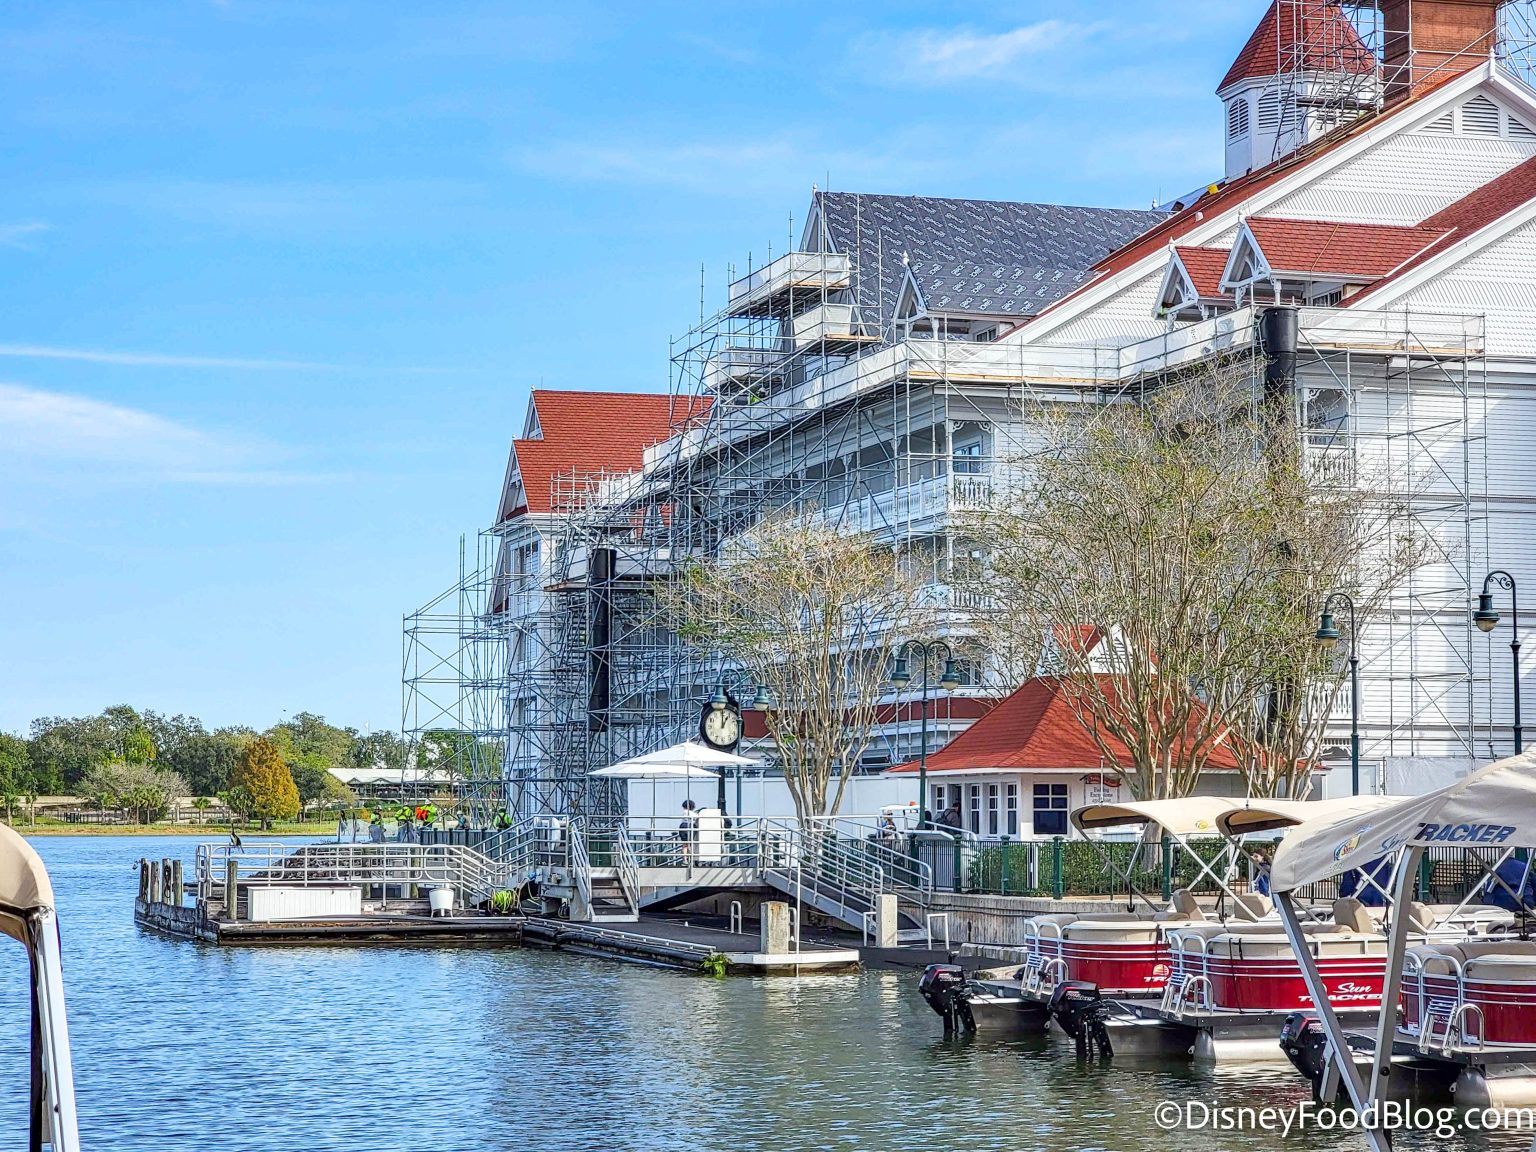 2022 Wdw Whats New Hotels Disneys Grand Floridian Resort And Spa Construction Conch Key Building 14 1536x1152 